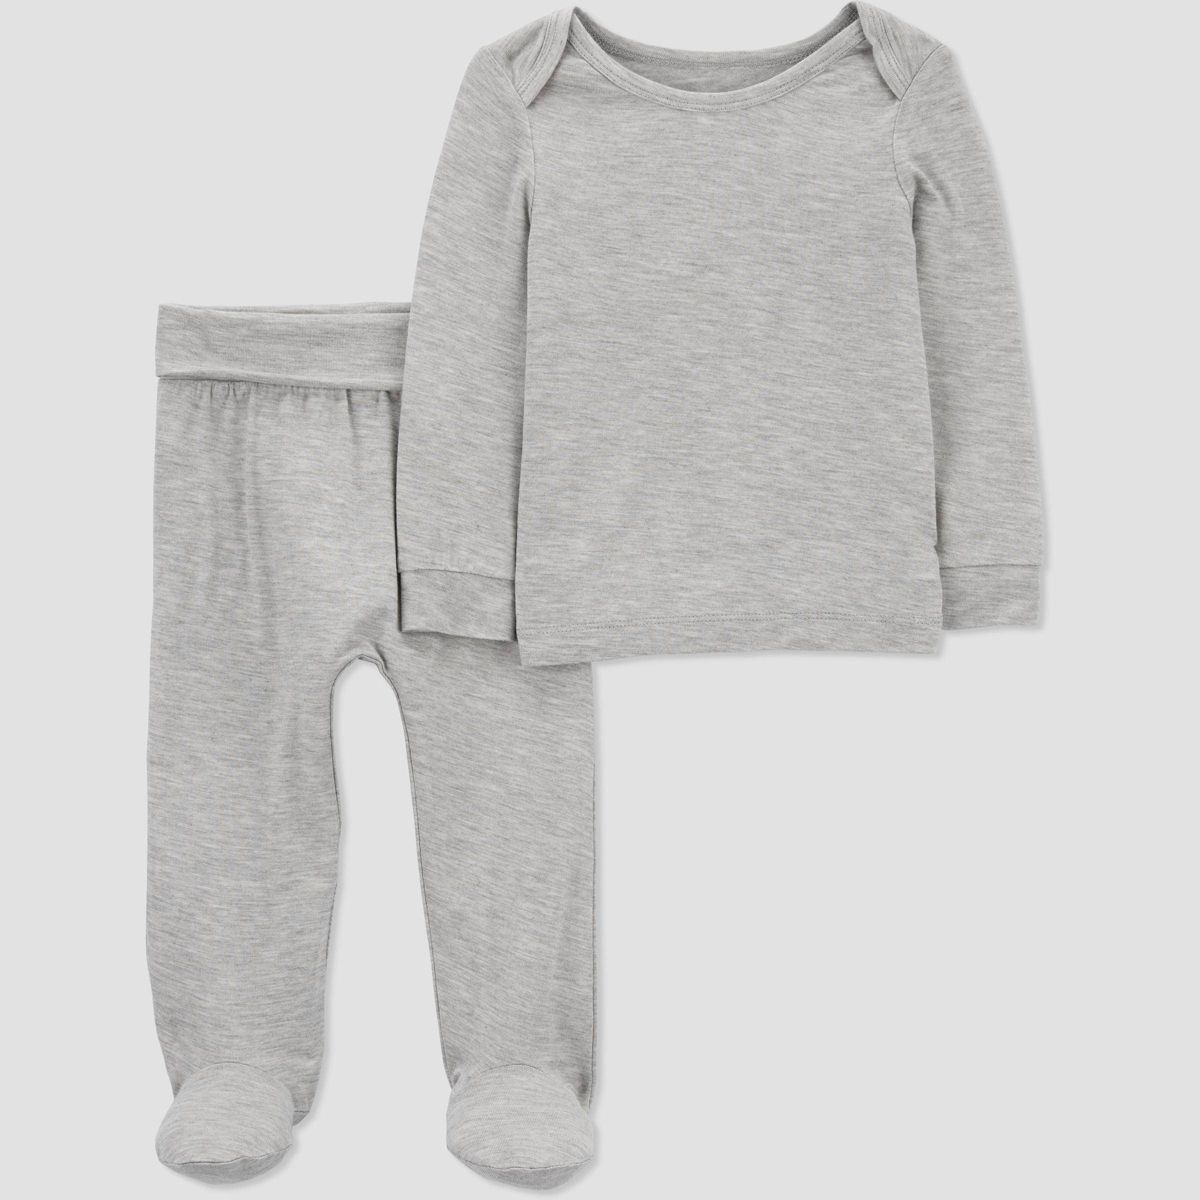 Carter's Just One You®️ Baby Boys' 2pc Top & Bottom Set - Heather Gray | Target